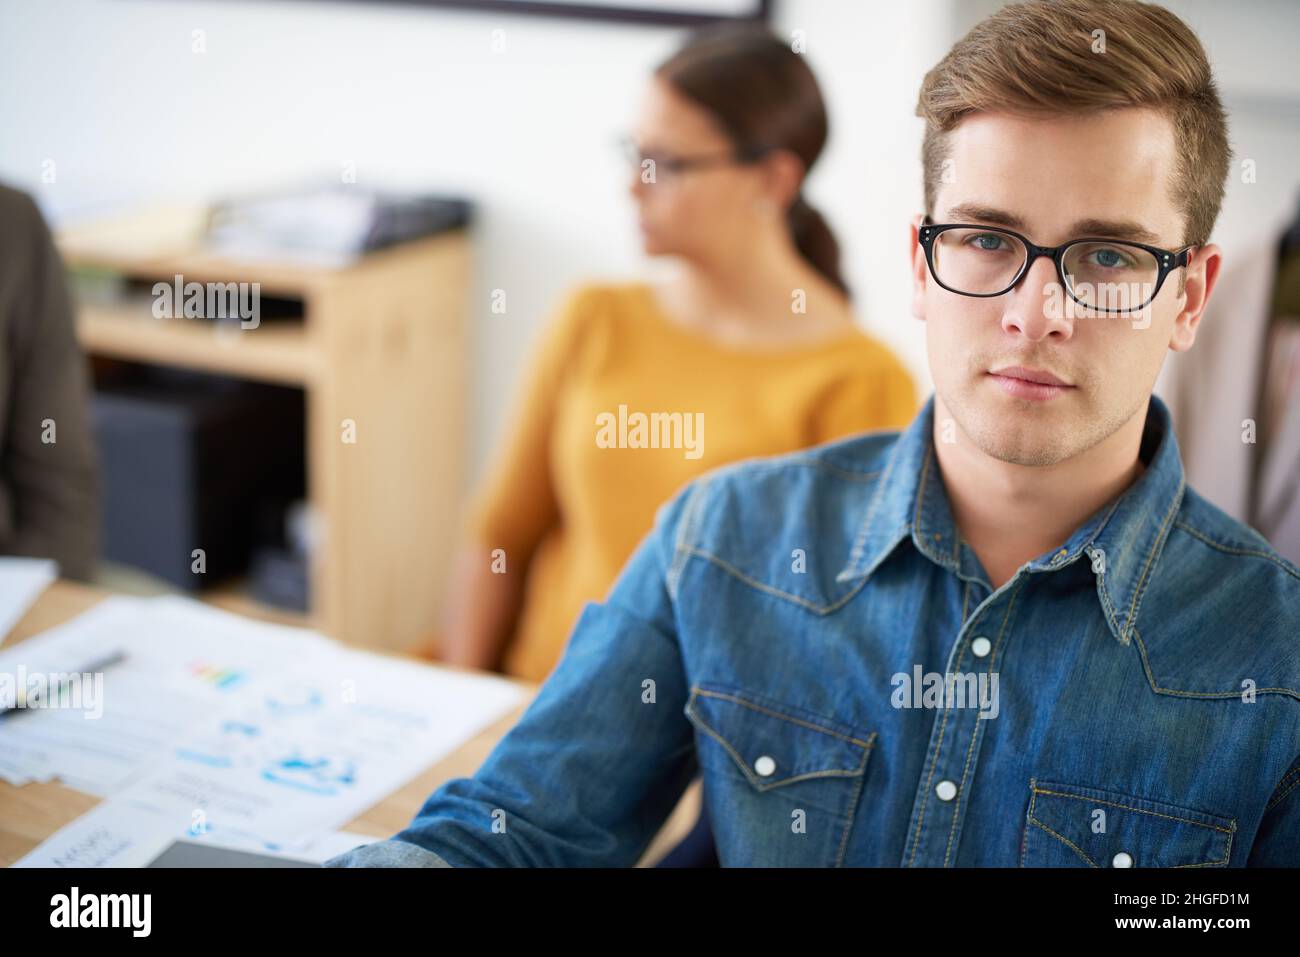 Focused on success. Cropped portrait of a young businessman in the office. Stock Photo